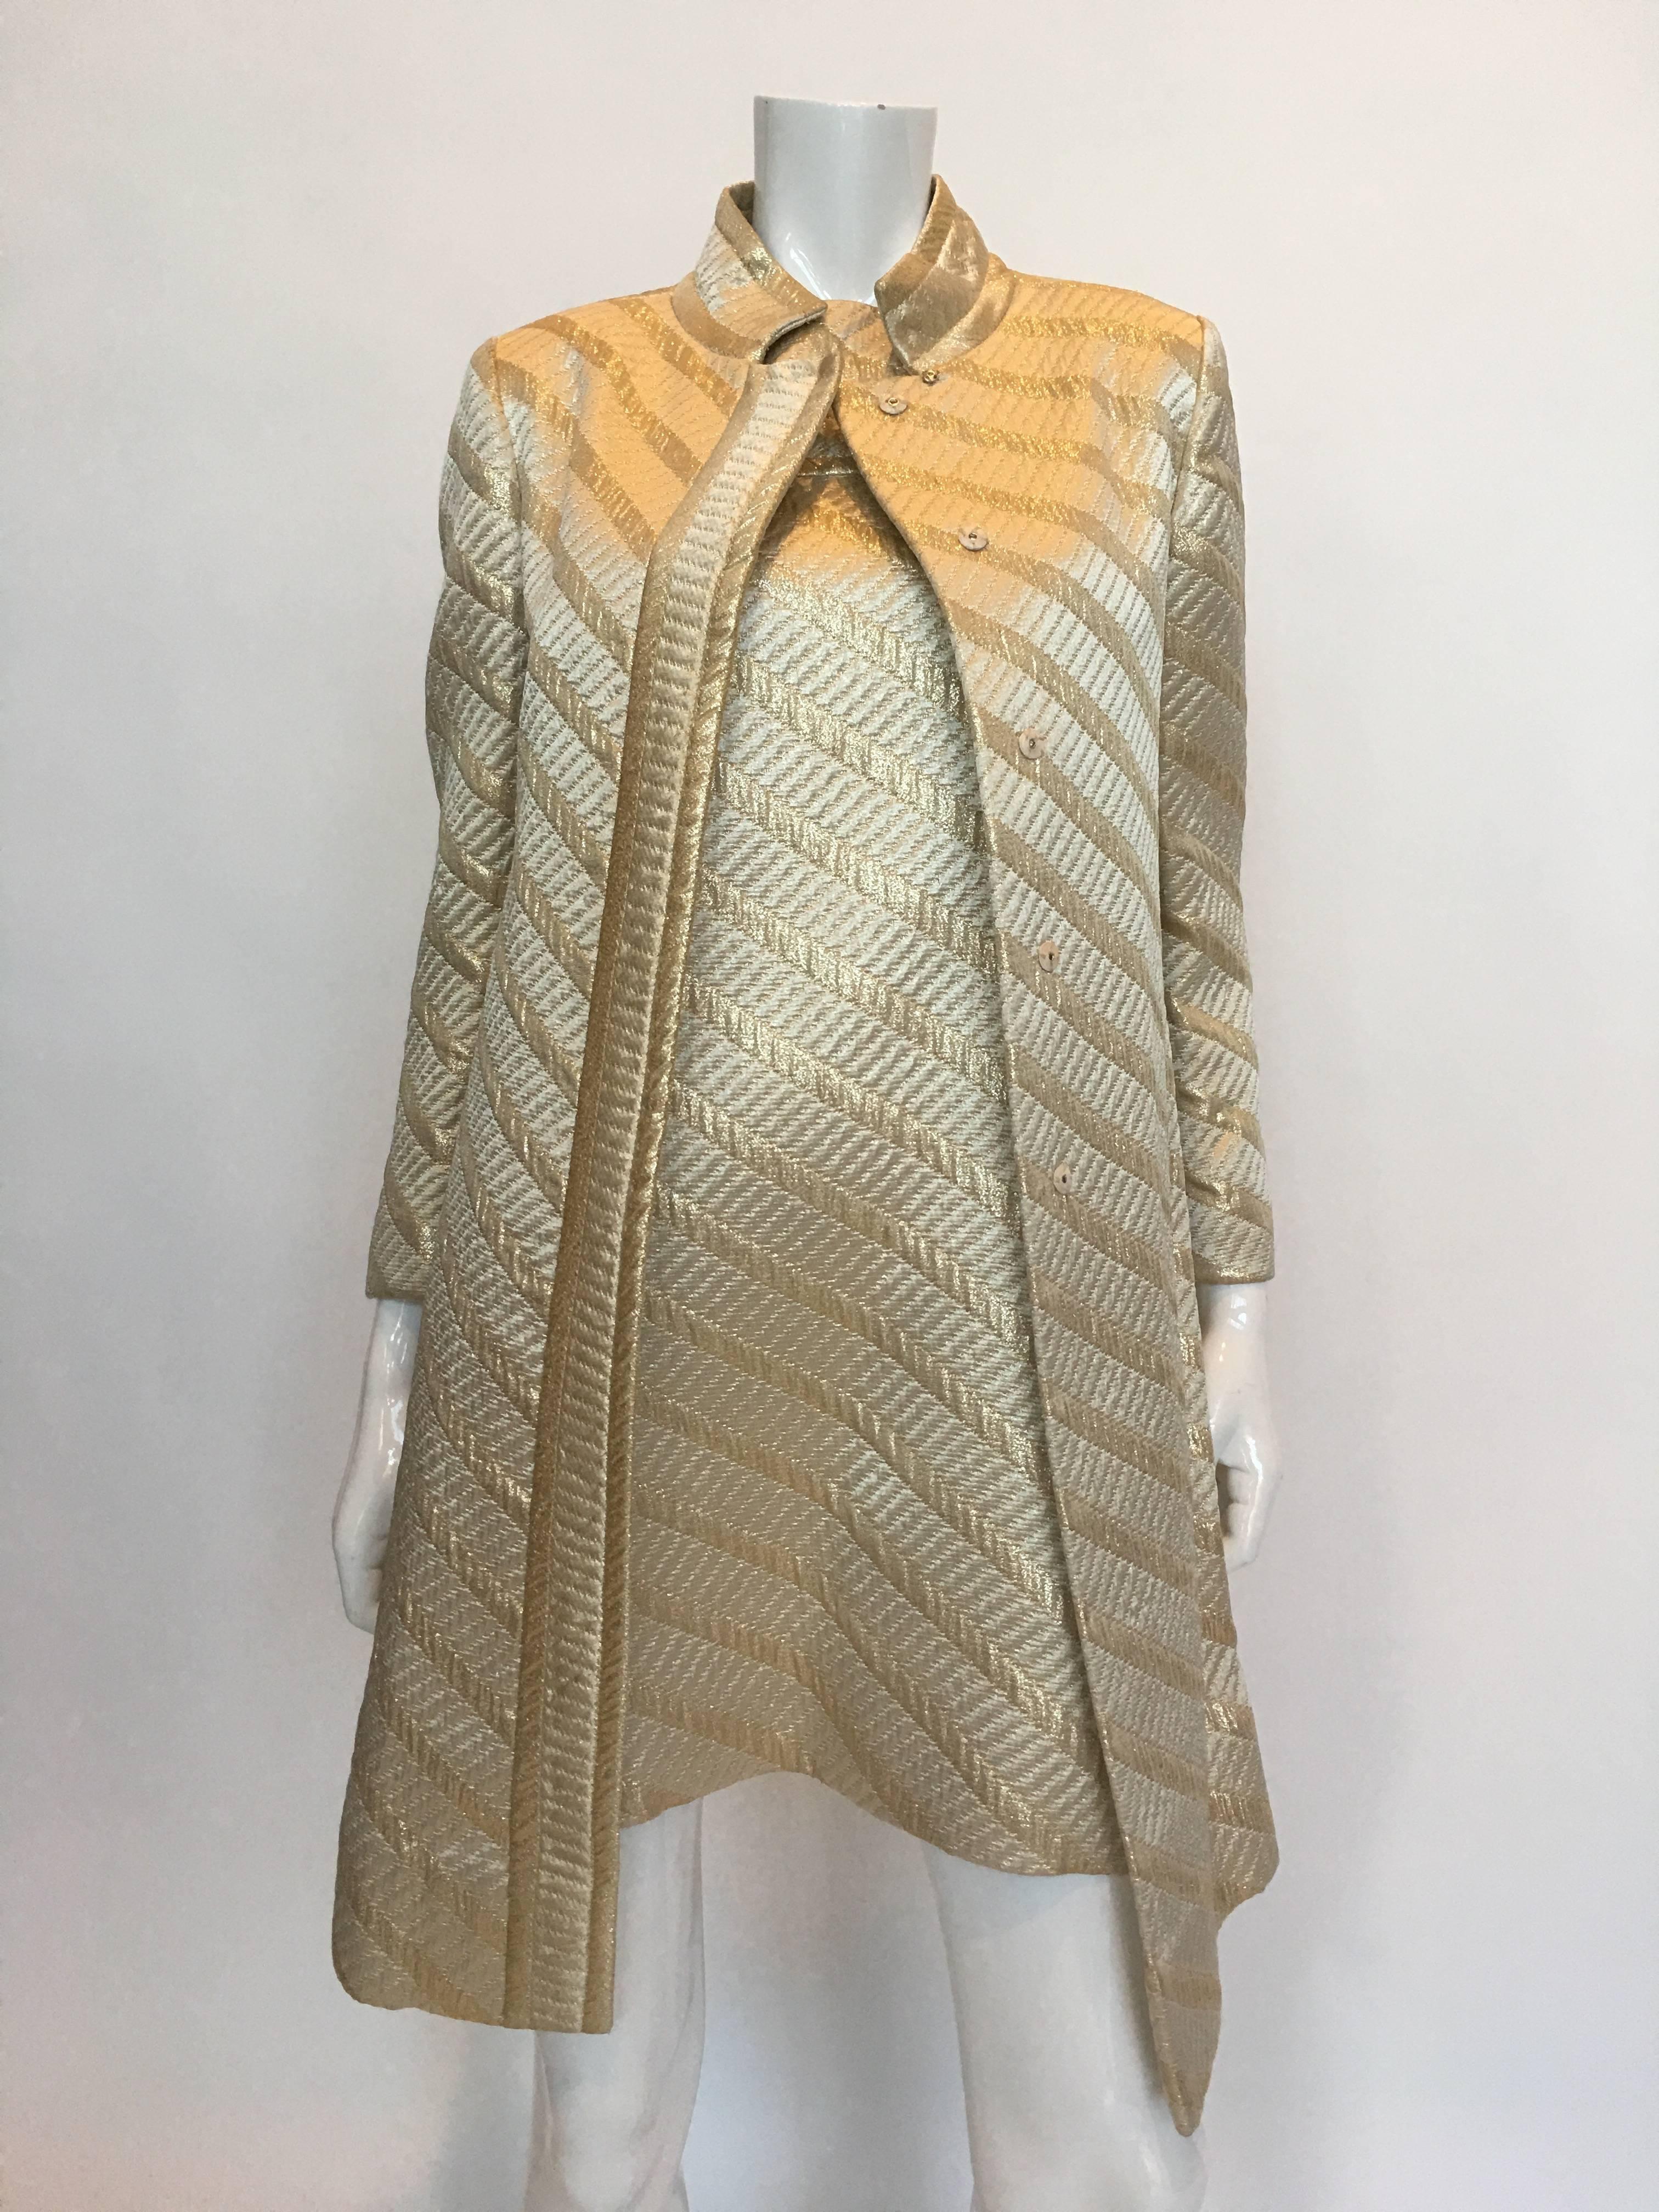 1960s Mod Jackie O Style Gold Matching Coat and Dress 2 Piece Ensemble 
Made in USA - Union Label

Size Label: 
Jacket - 9 
Dress - 10

Jacket:
Shoulders - Seam to seam: 15